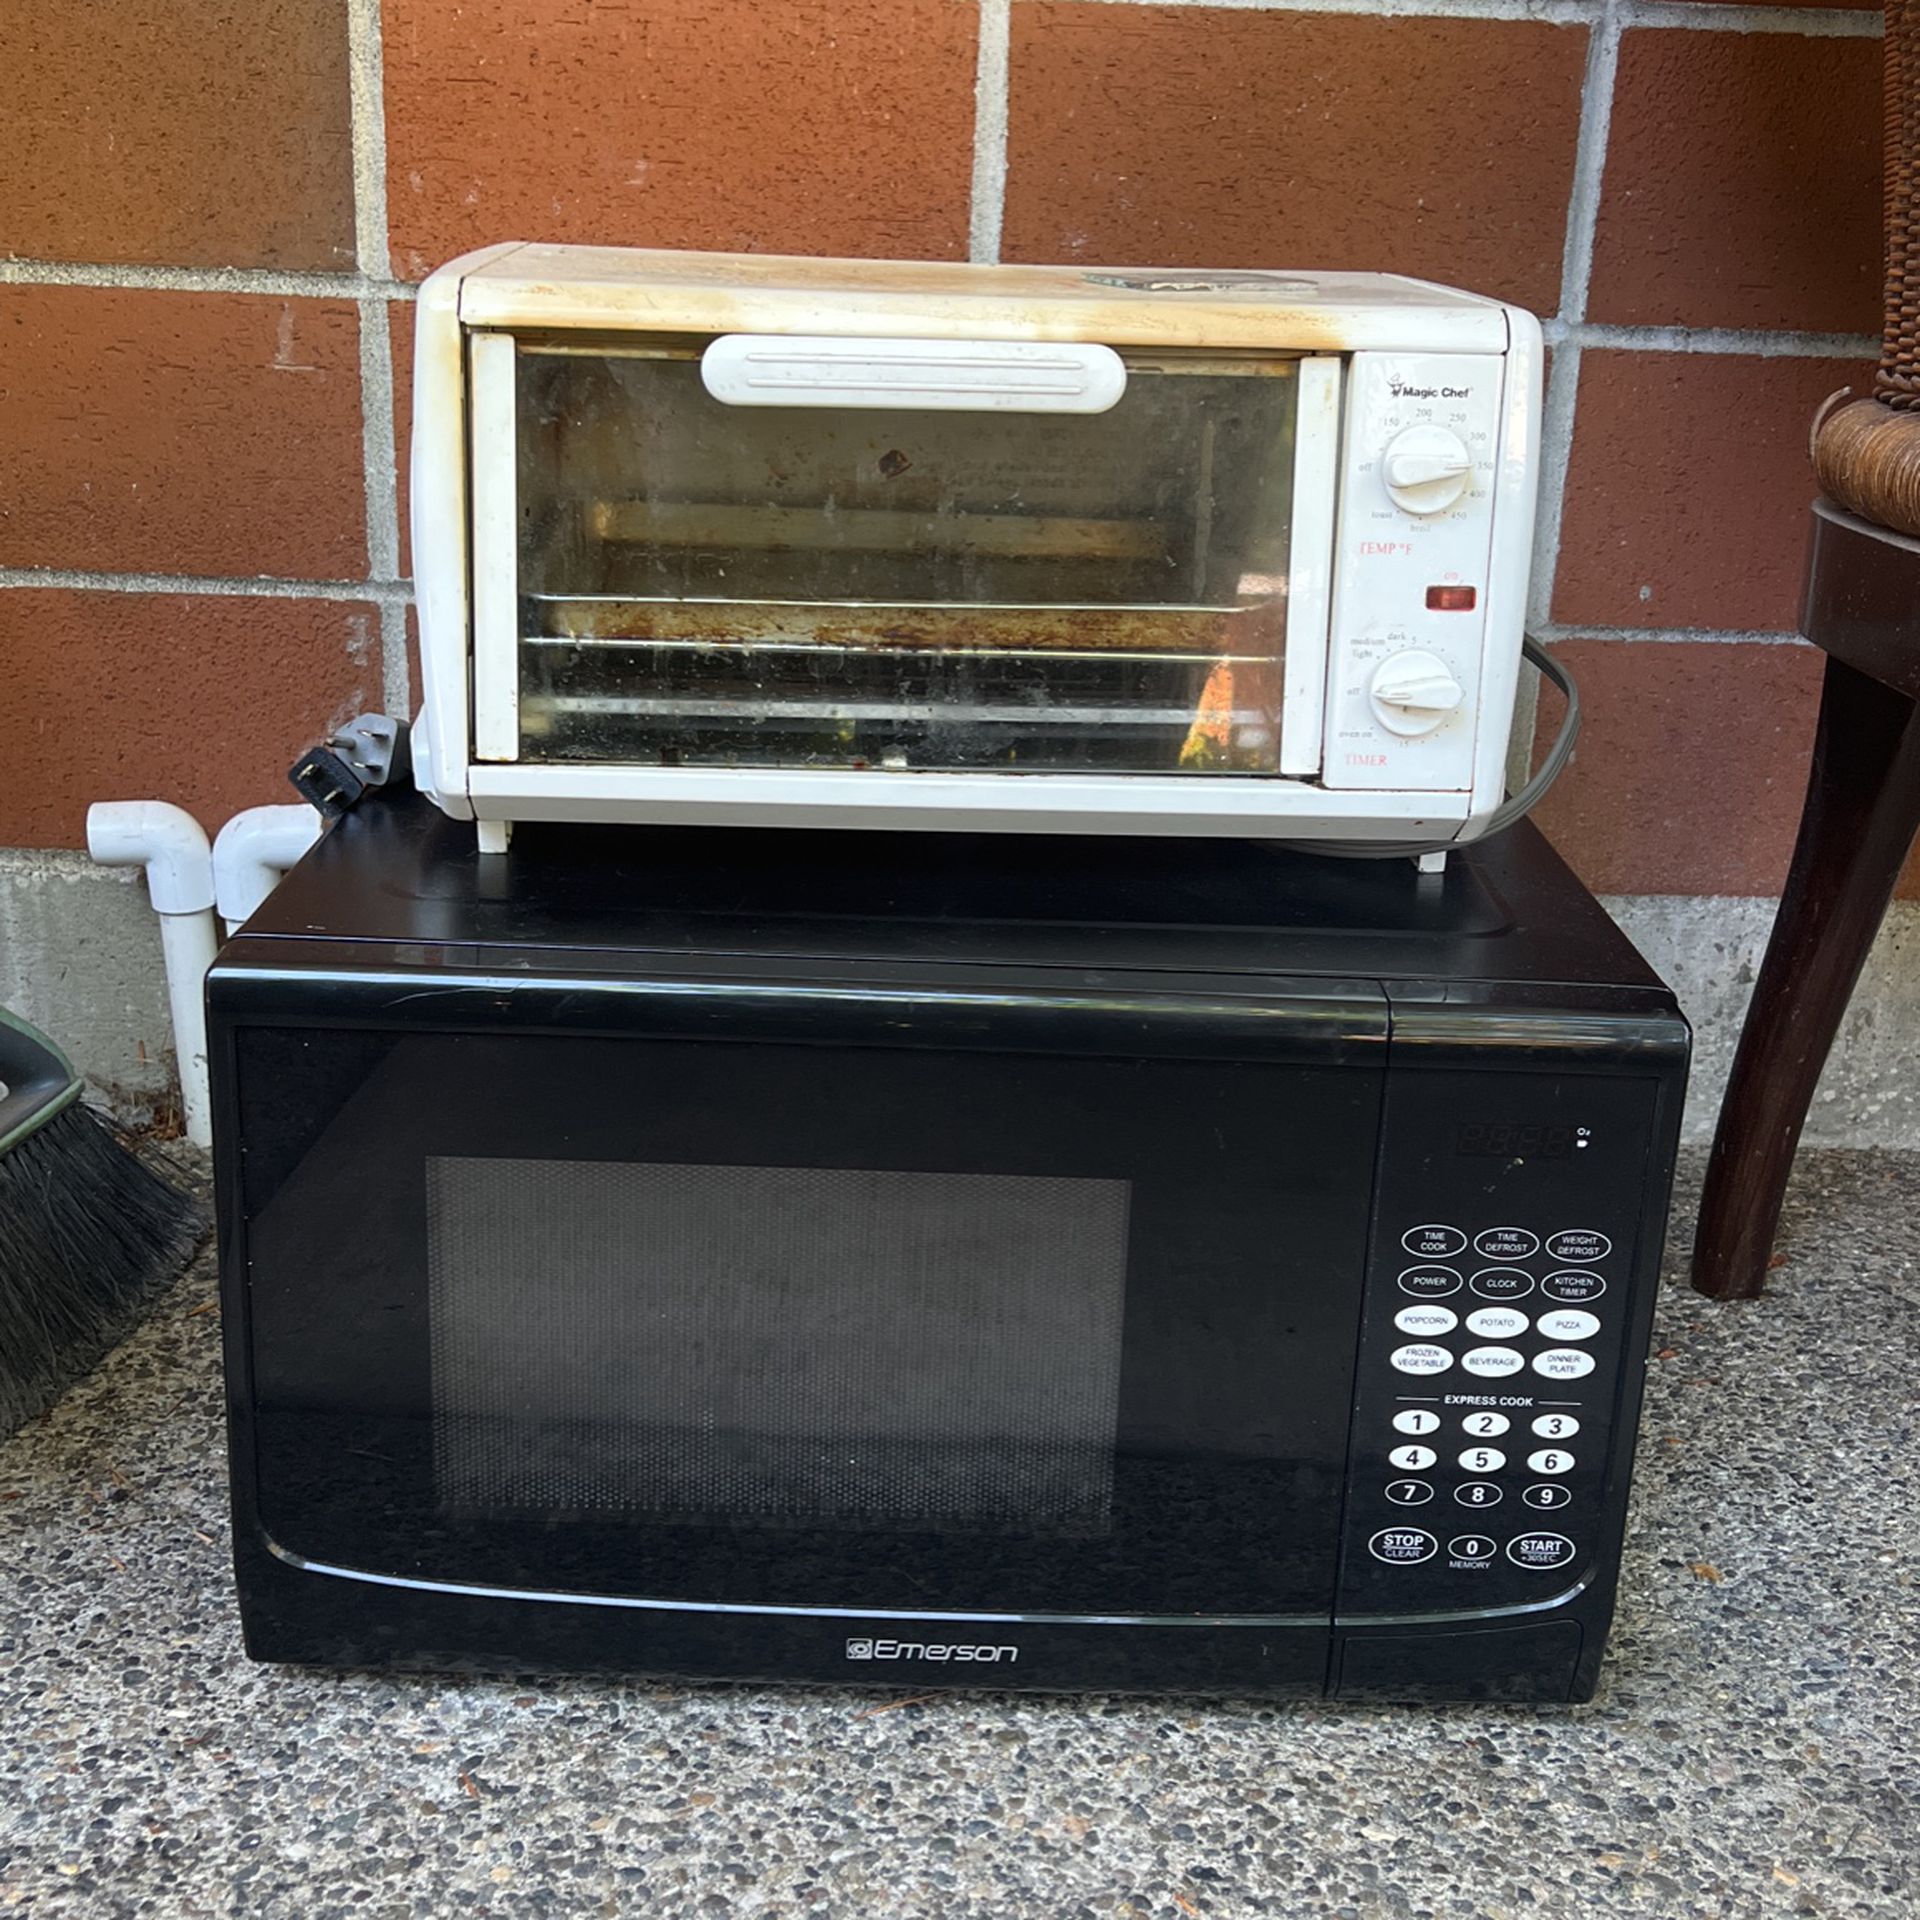 Microwave & Toaster Oven 